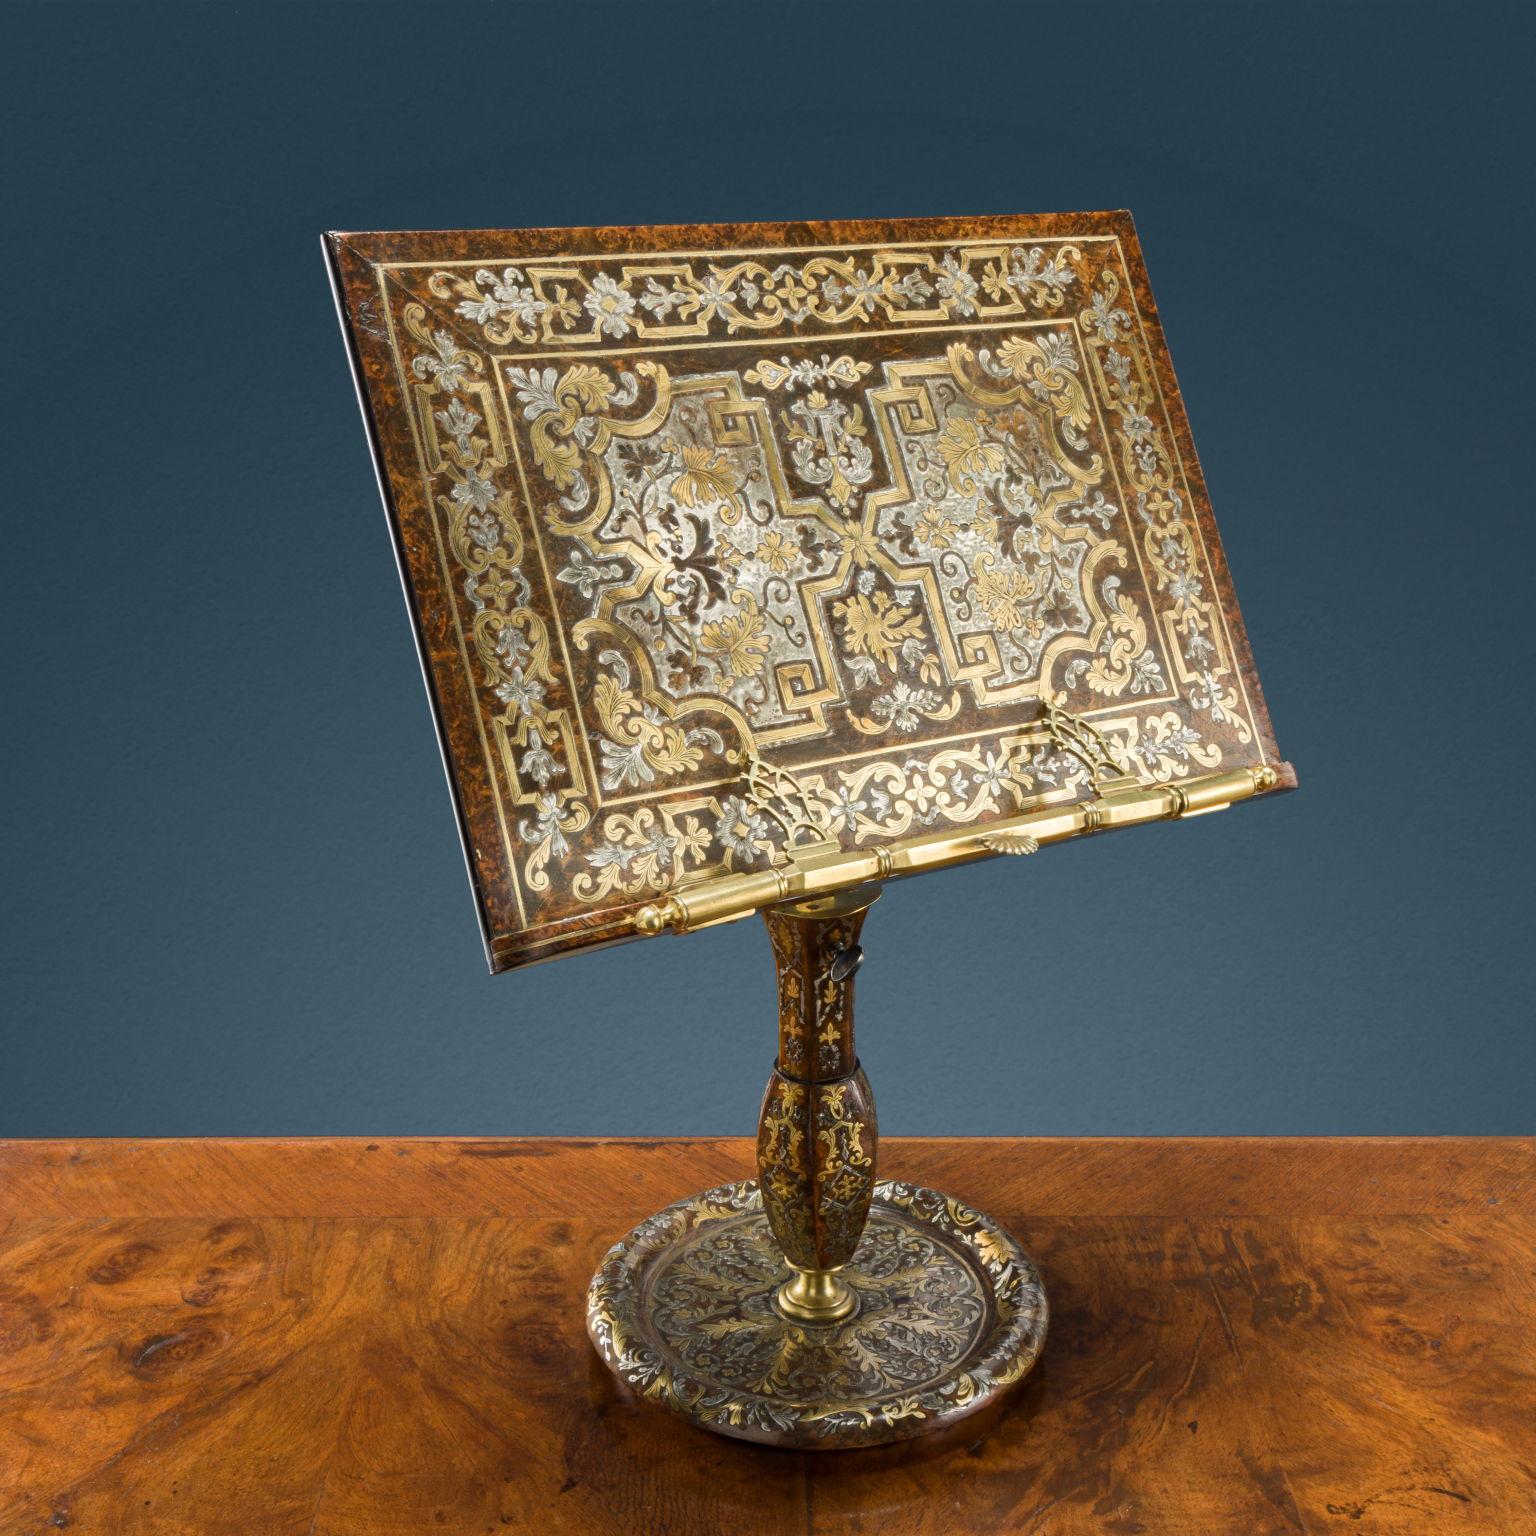 Table lectern resting on a circular base and supported by a central stem, into which the height-adjustment rod engages, with mechanical device for tilting the brass lectern with blued steel parts, as well as the score stop on the front. The work is